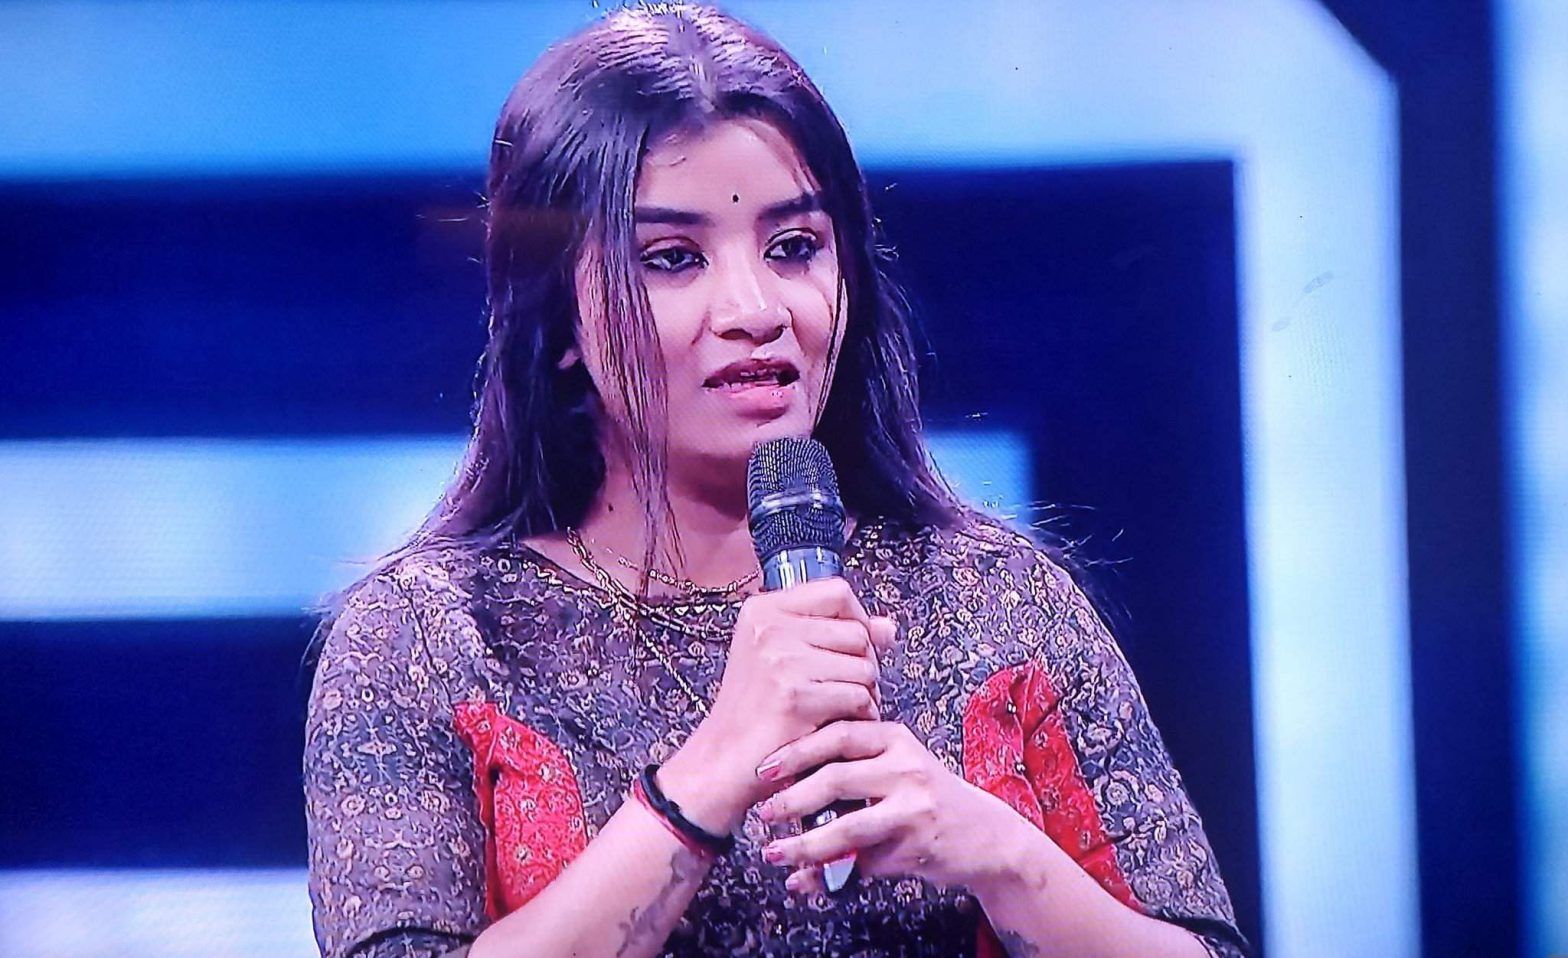 Dhanalakshmi about her favourite contestants in bigg boss house